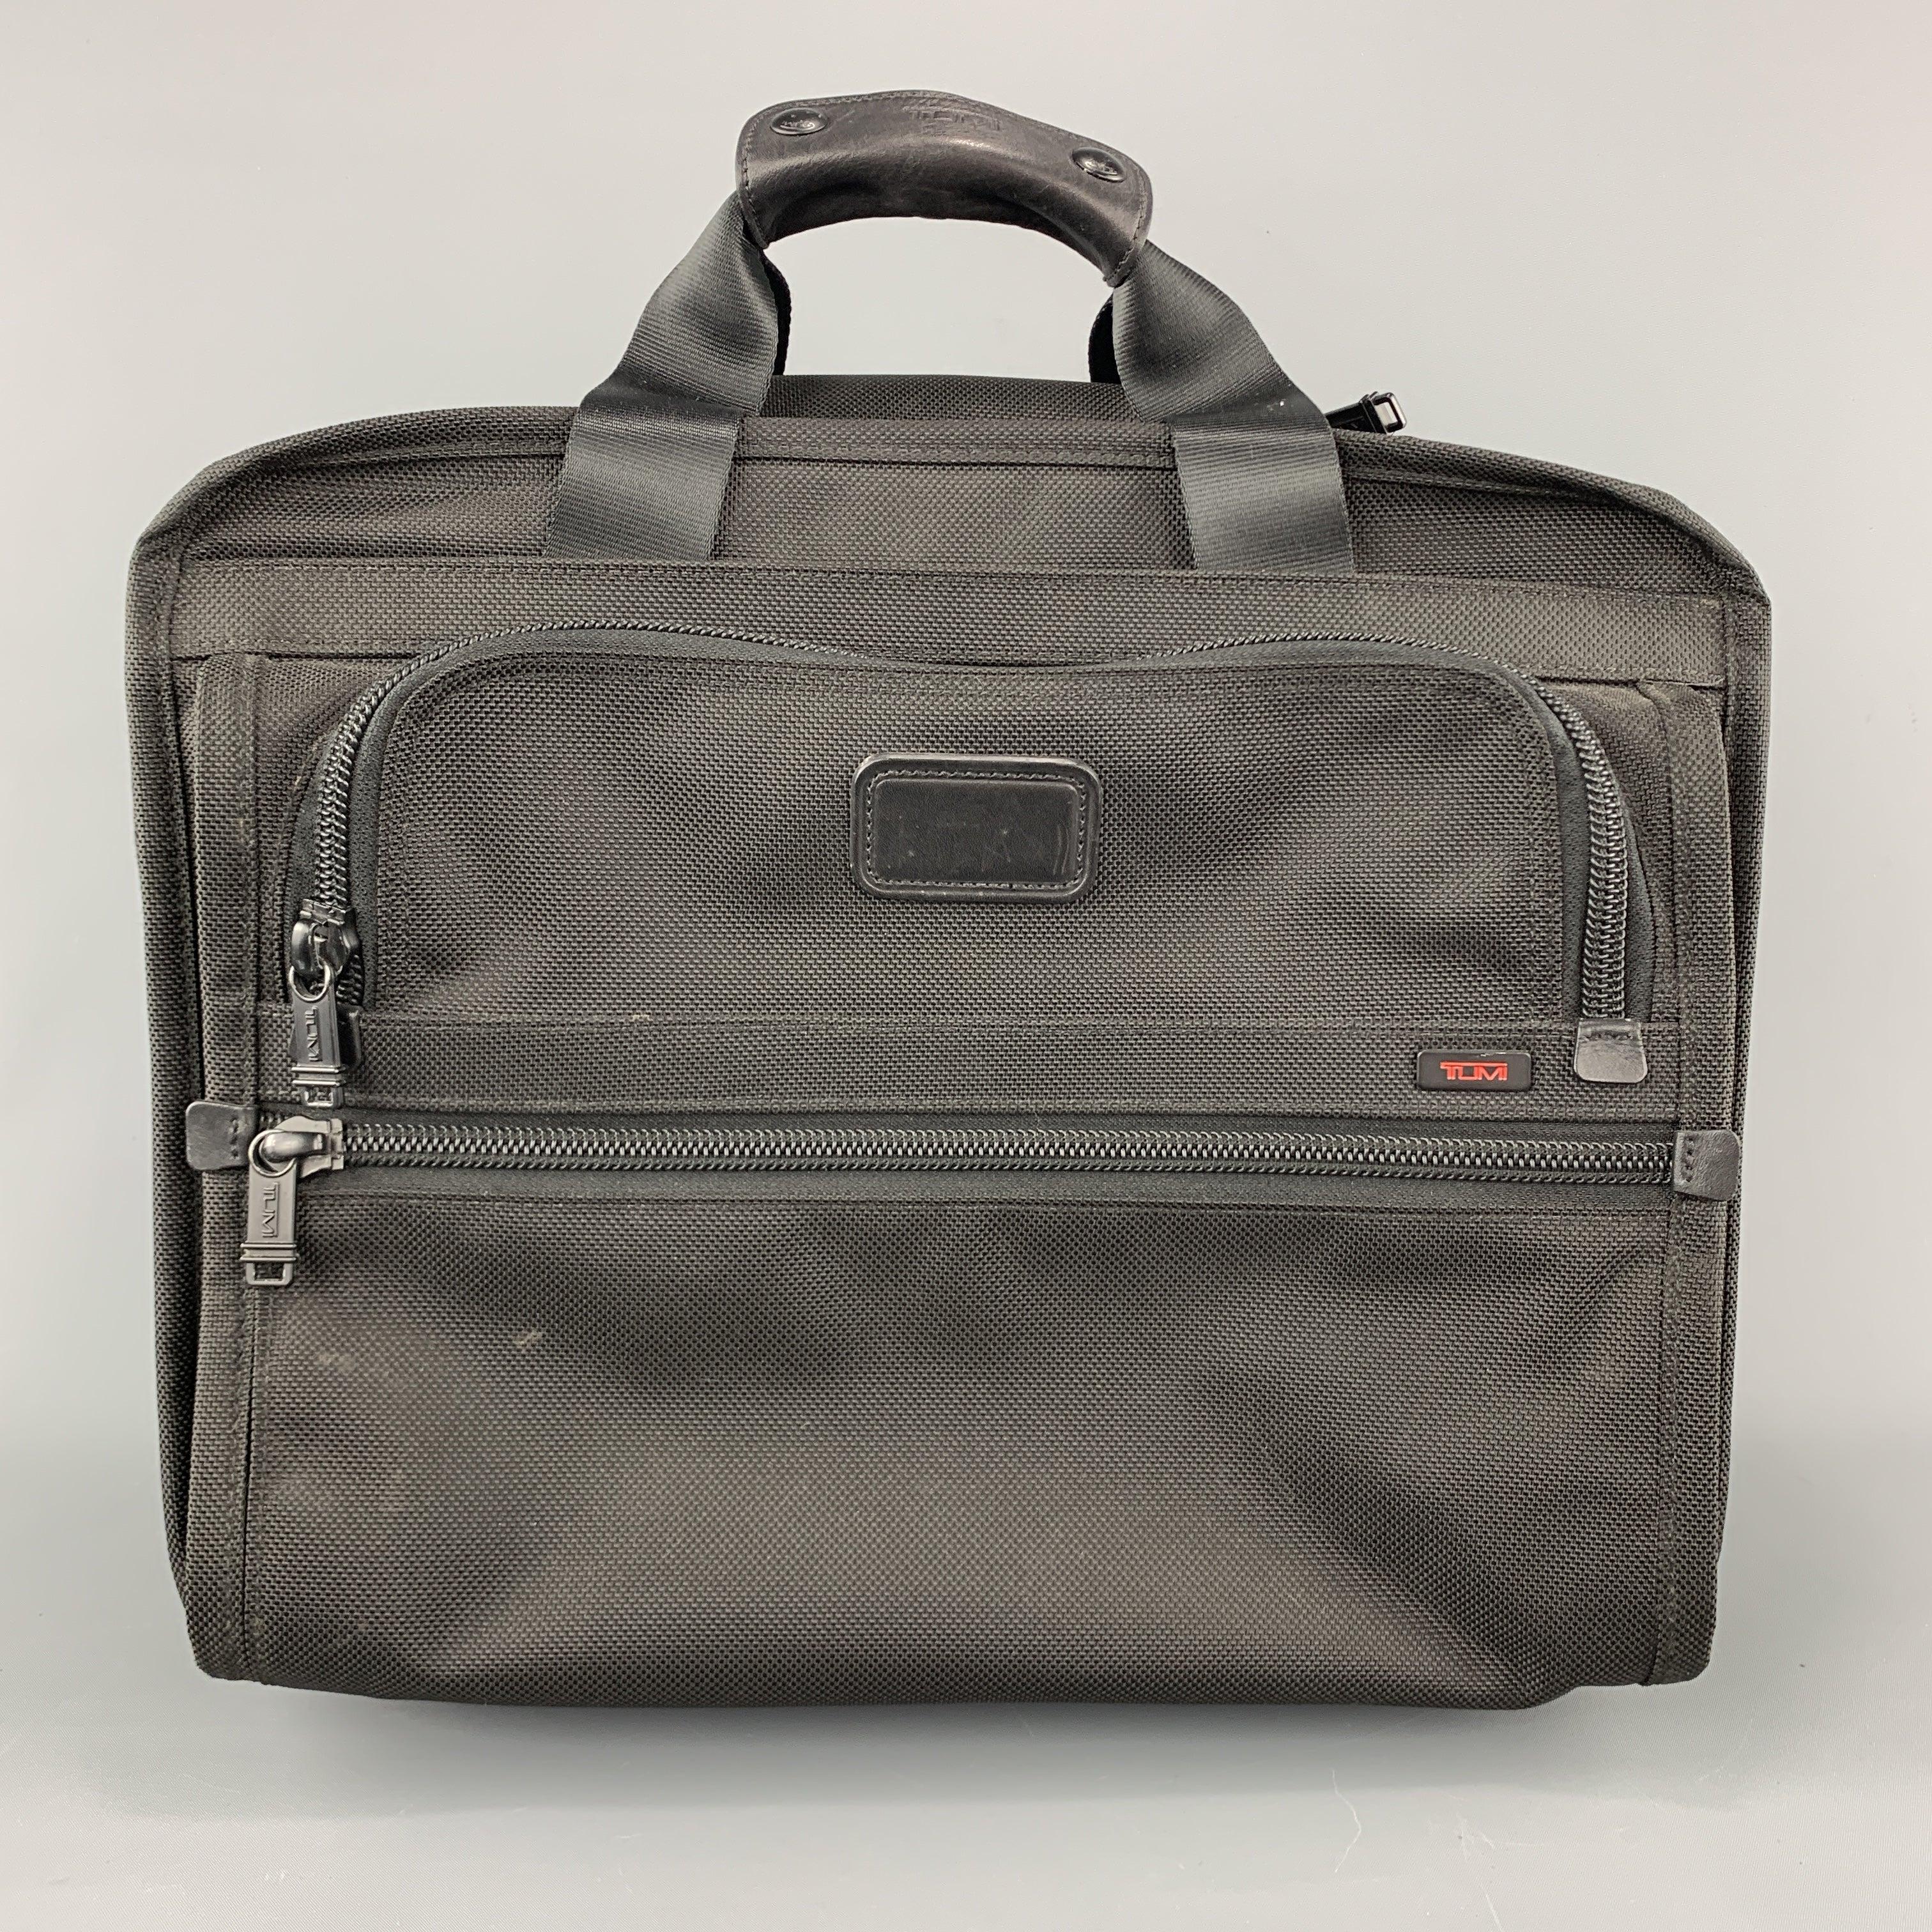 TUMI roller suitcase comes in black nylon canvas with zip pockets, optional retractable handle, top handles, and inner compartments. Wear throughout. As-is.Fair
Pre-Owned Condition. 

Measurements: 
  Length: 16 inches Width:
9 inches Height:
13.5